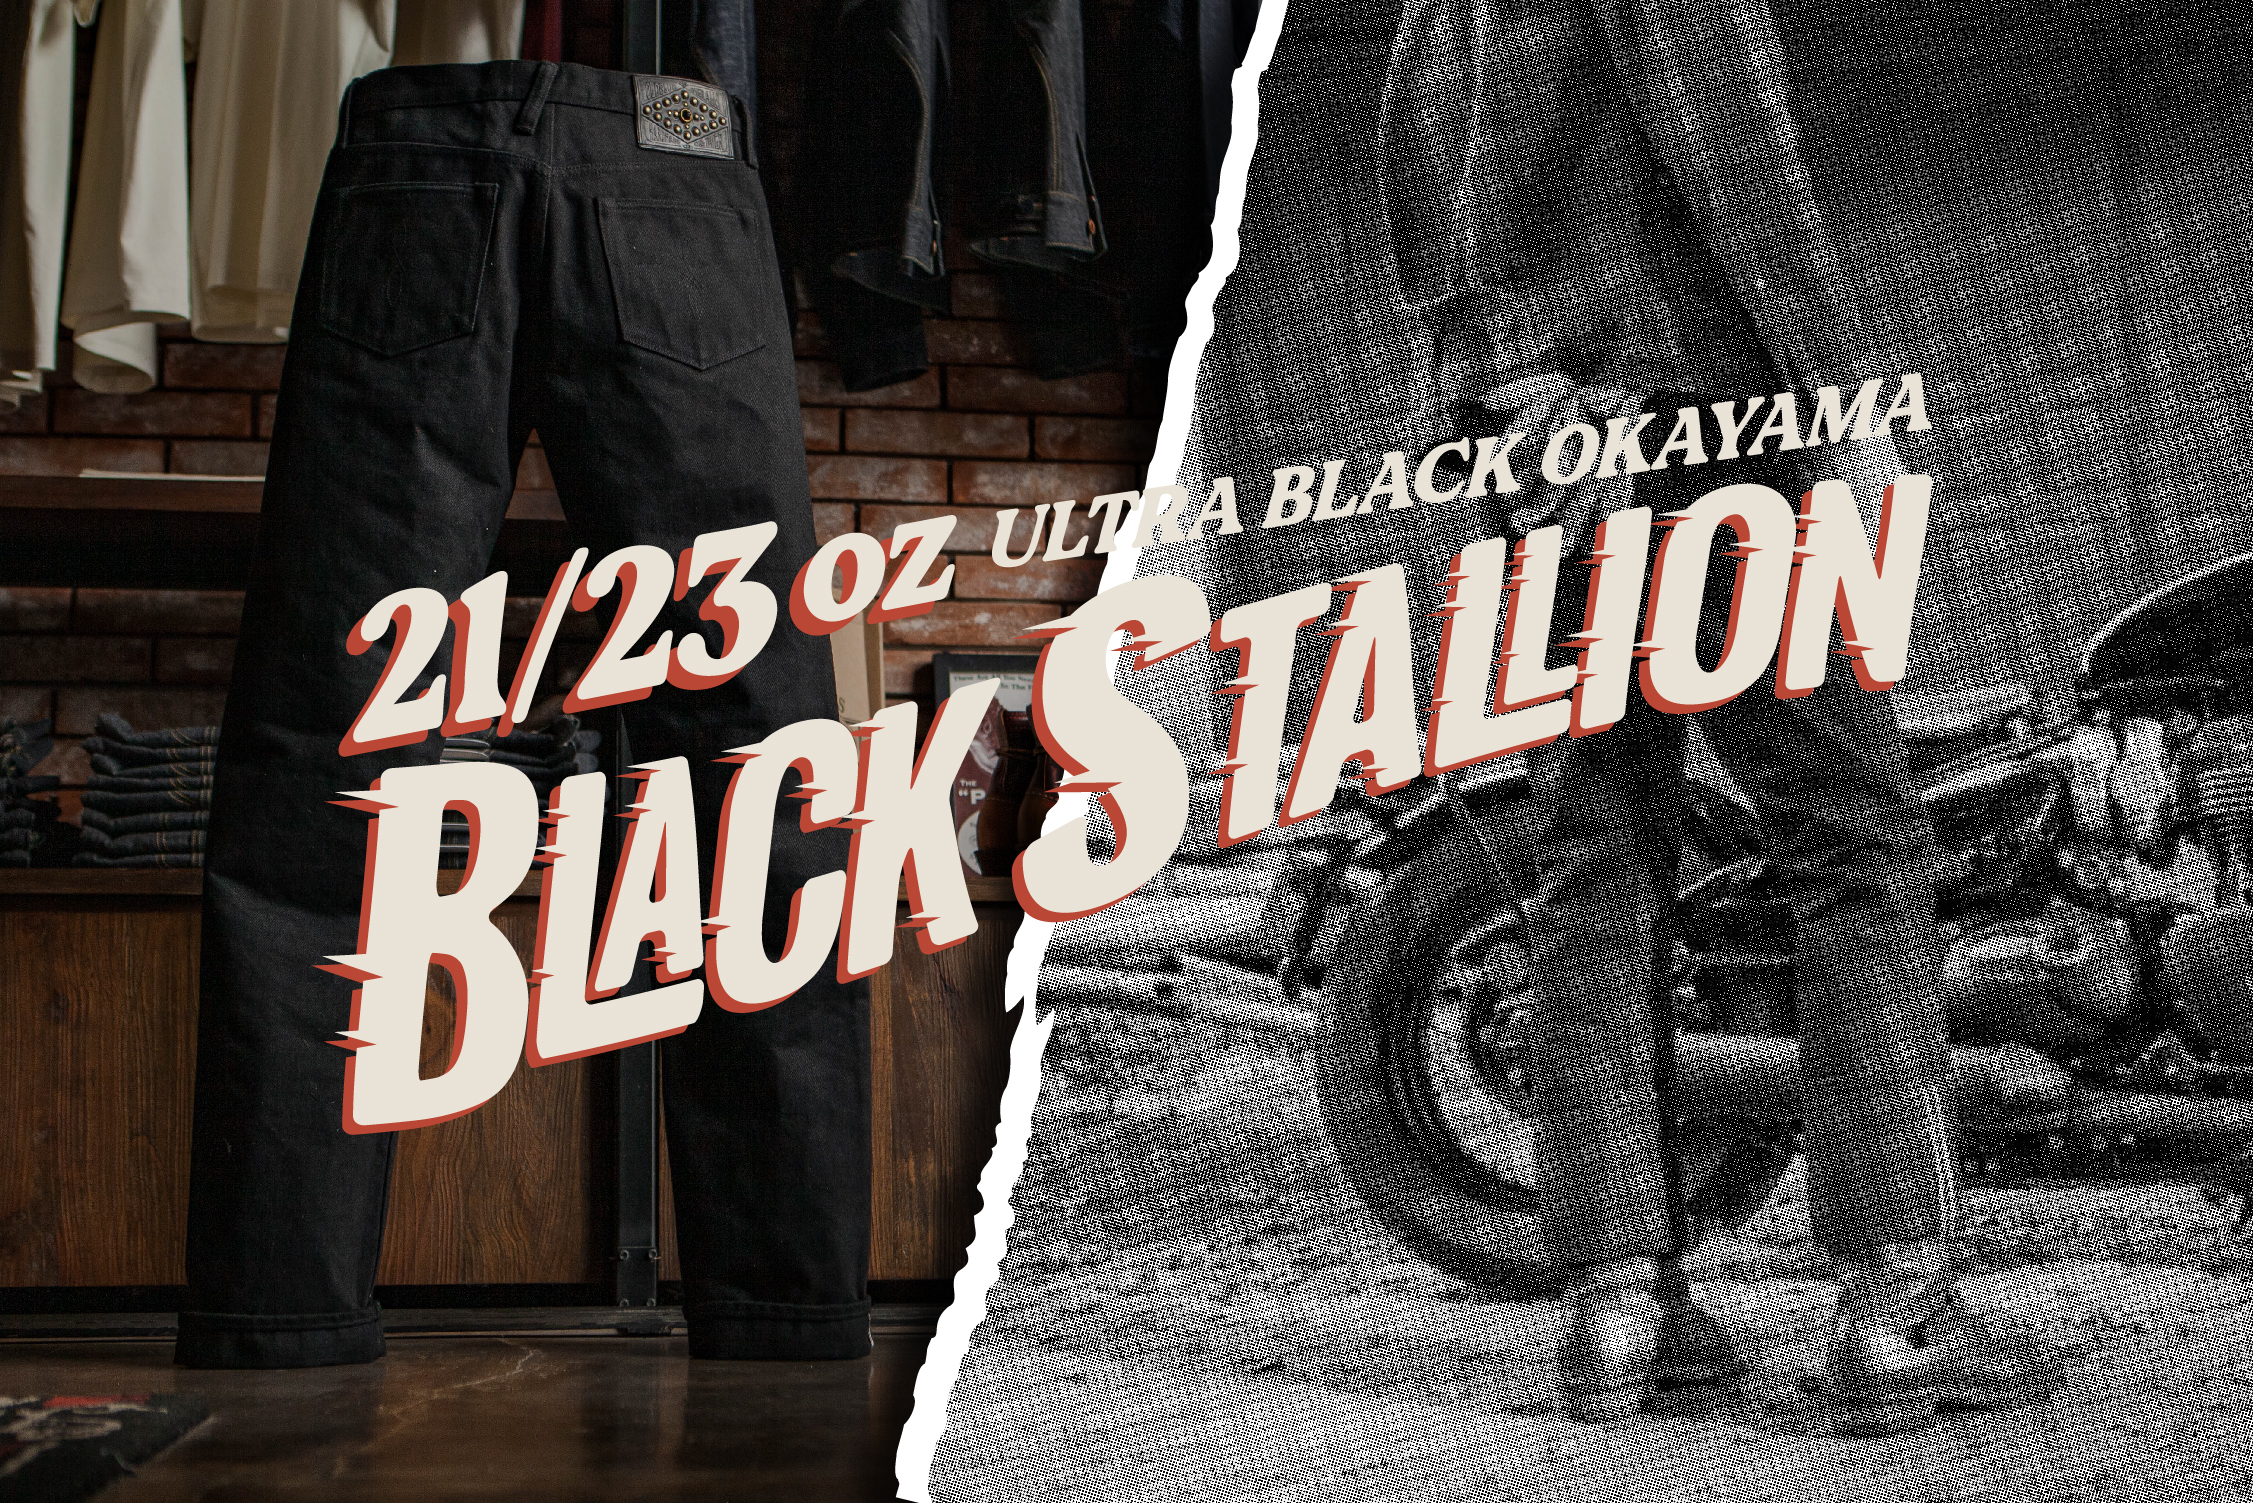 RESTOCK ALERT: THE WILD, THE RUTHLESS, AND THE BLACK STALLION!